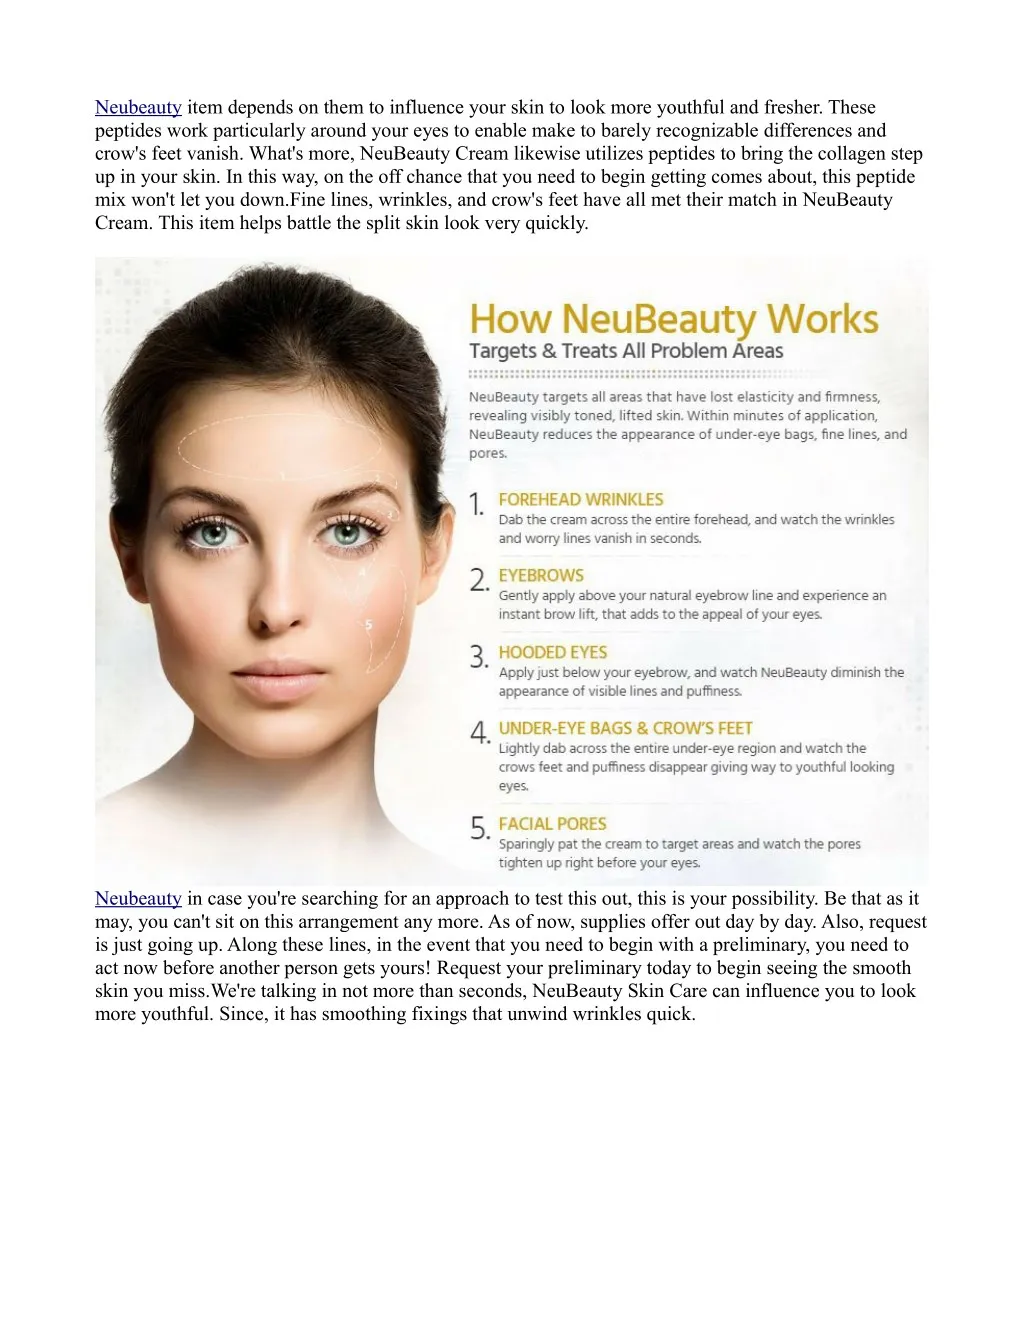 neubeauty item depends on them to influence your